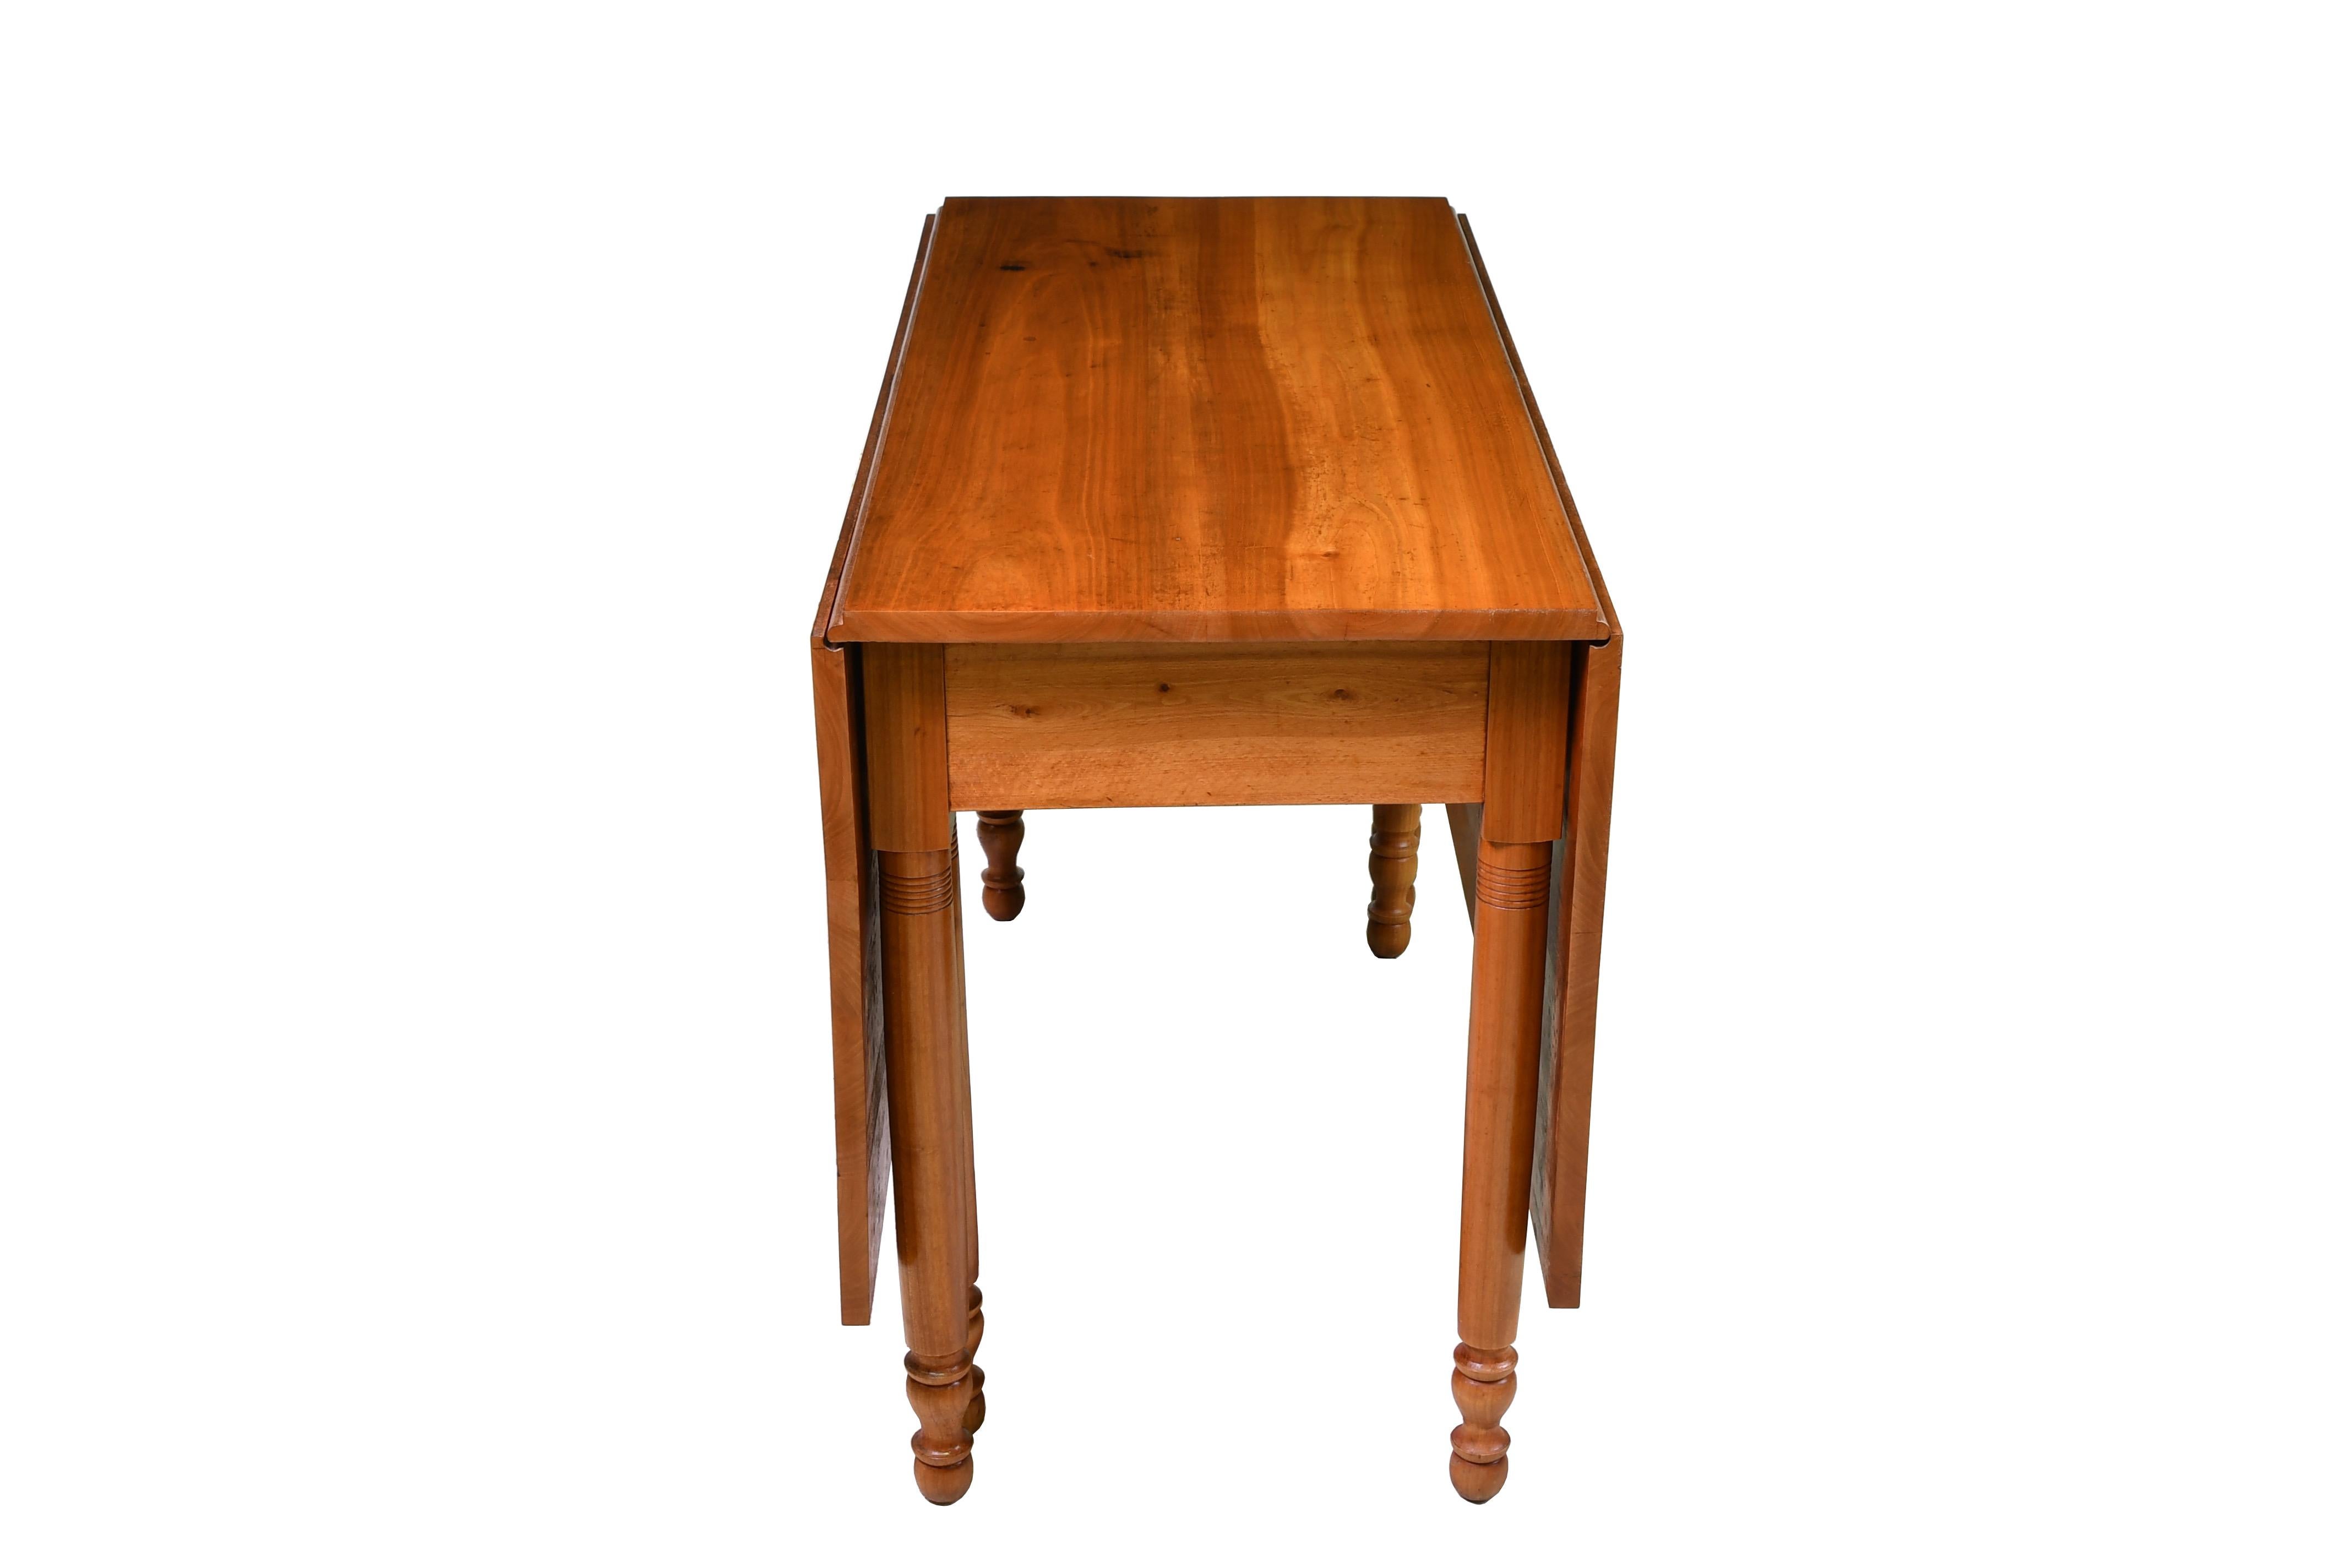 An exceptional American Sheraton dining table from southeastern Pennsylvania, made of fine solid cherry that has fine figuring & is a light amber color. When open, the long drop-leaves are supported by gate legs with turned cylindrical legs, with